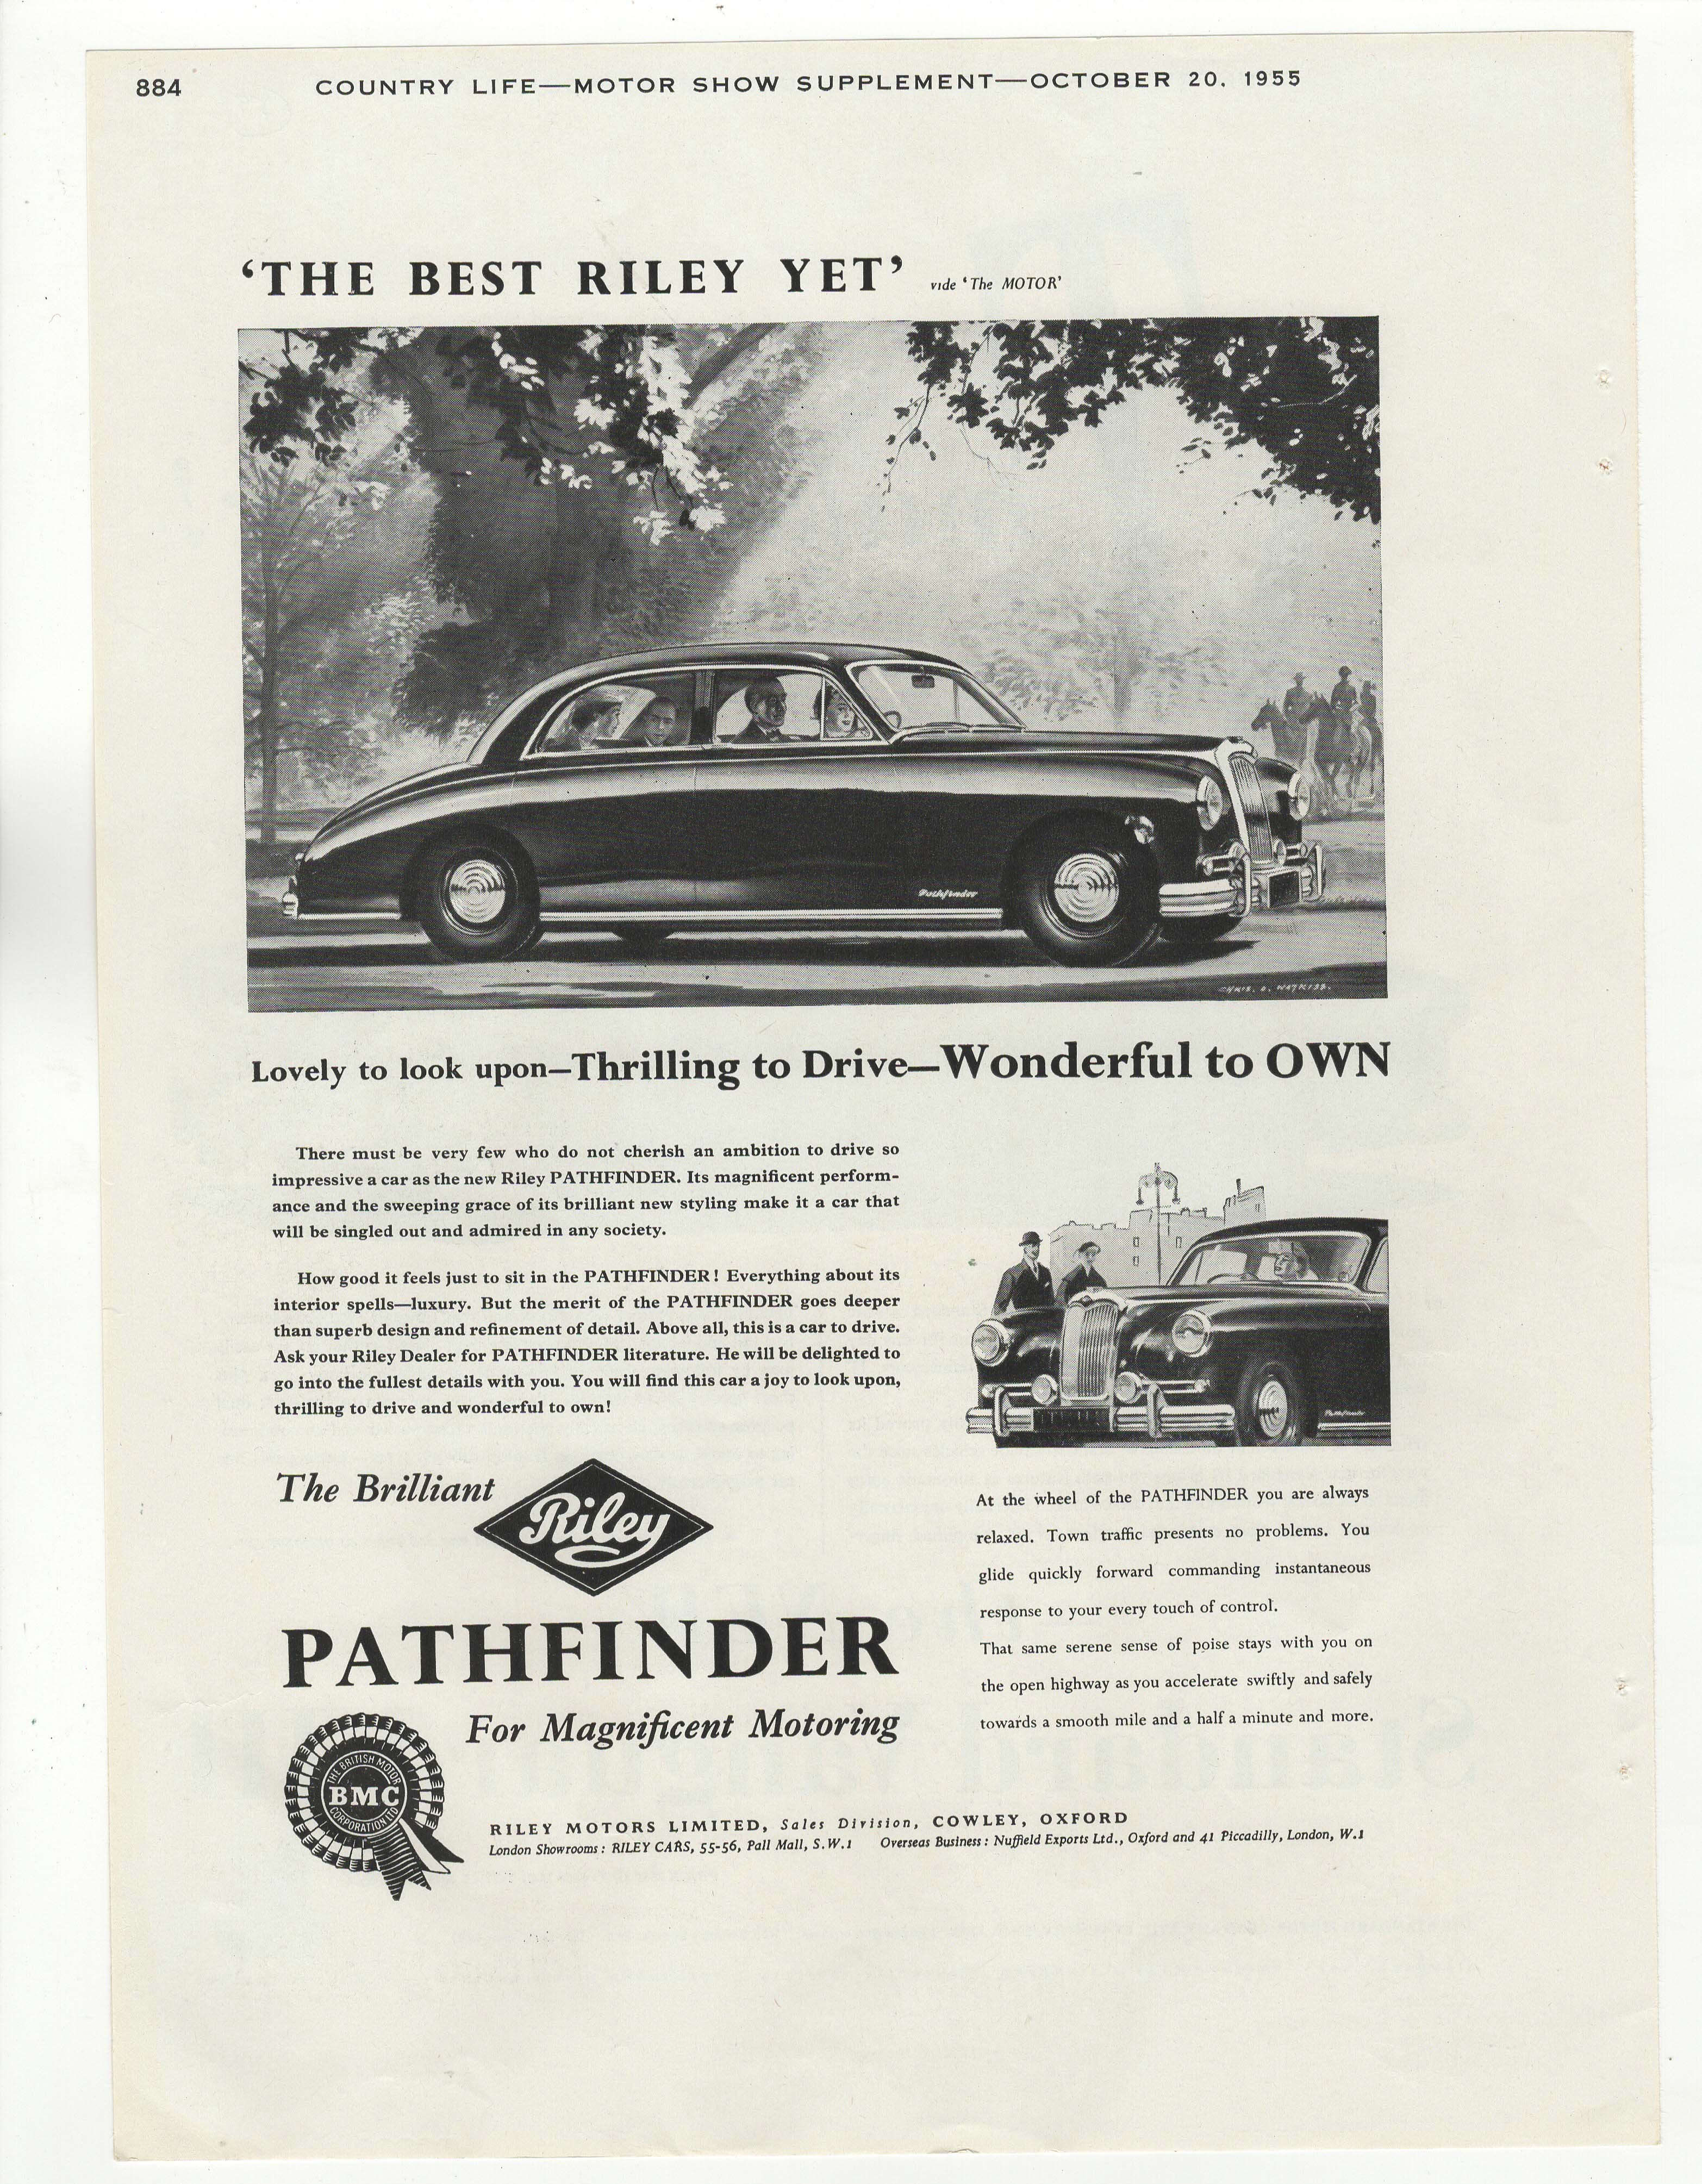 Riley Pathfinder-'The Best Riley Yet'-five full page 1955 advertisement-black and white